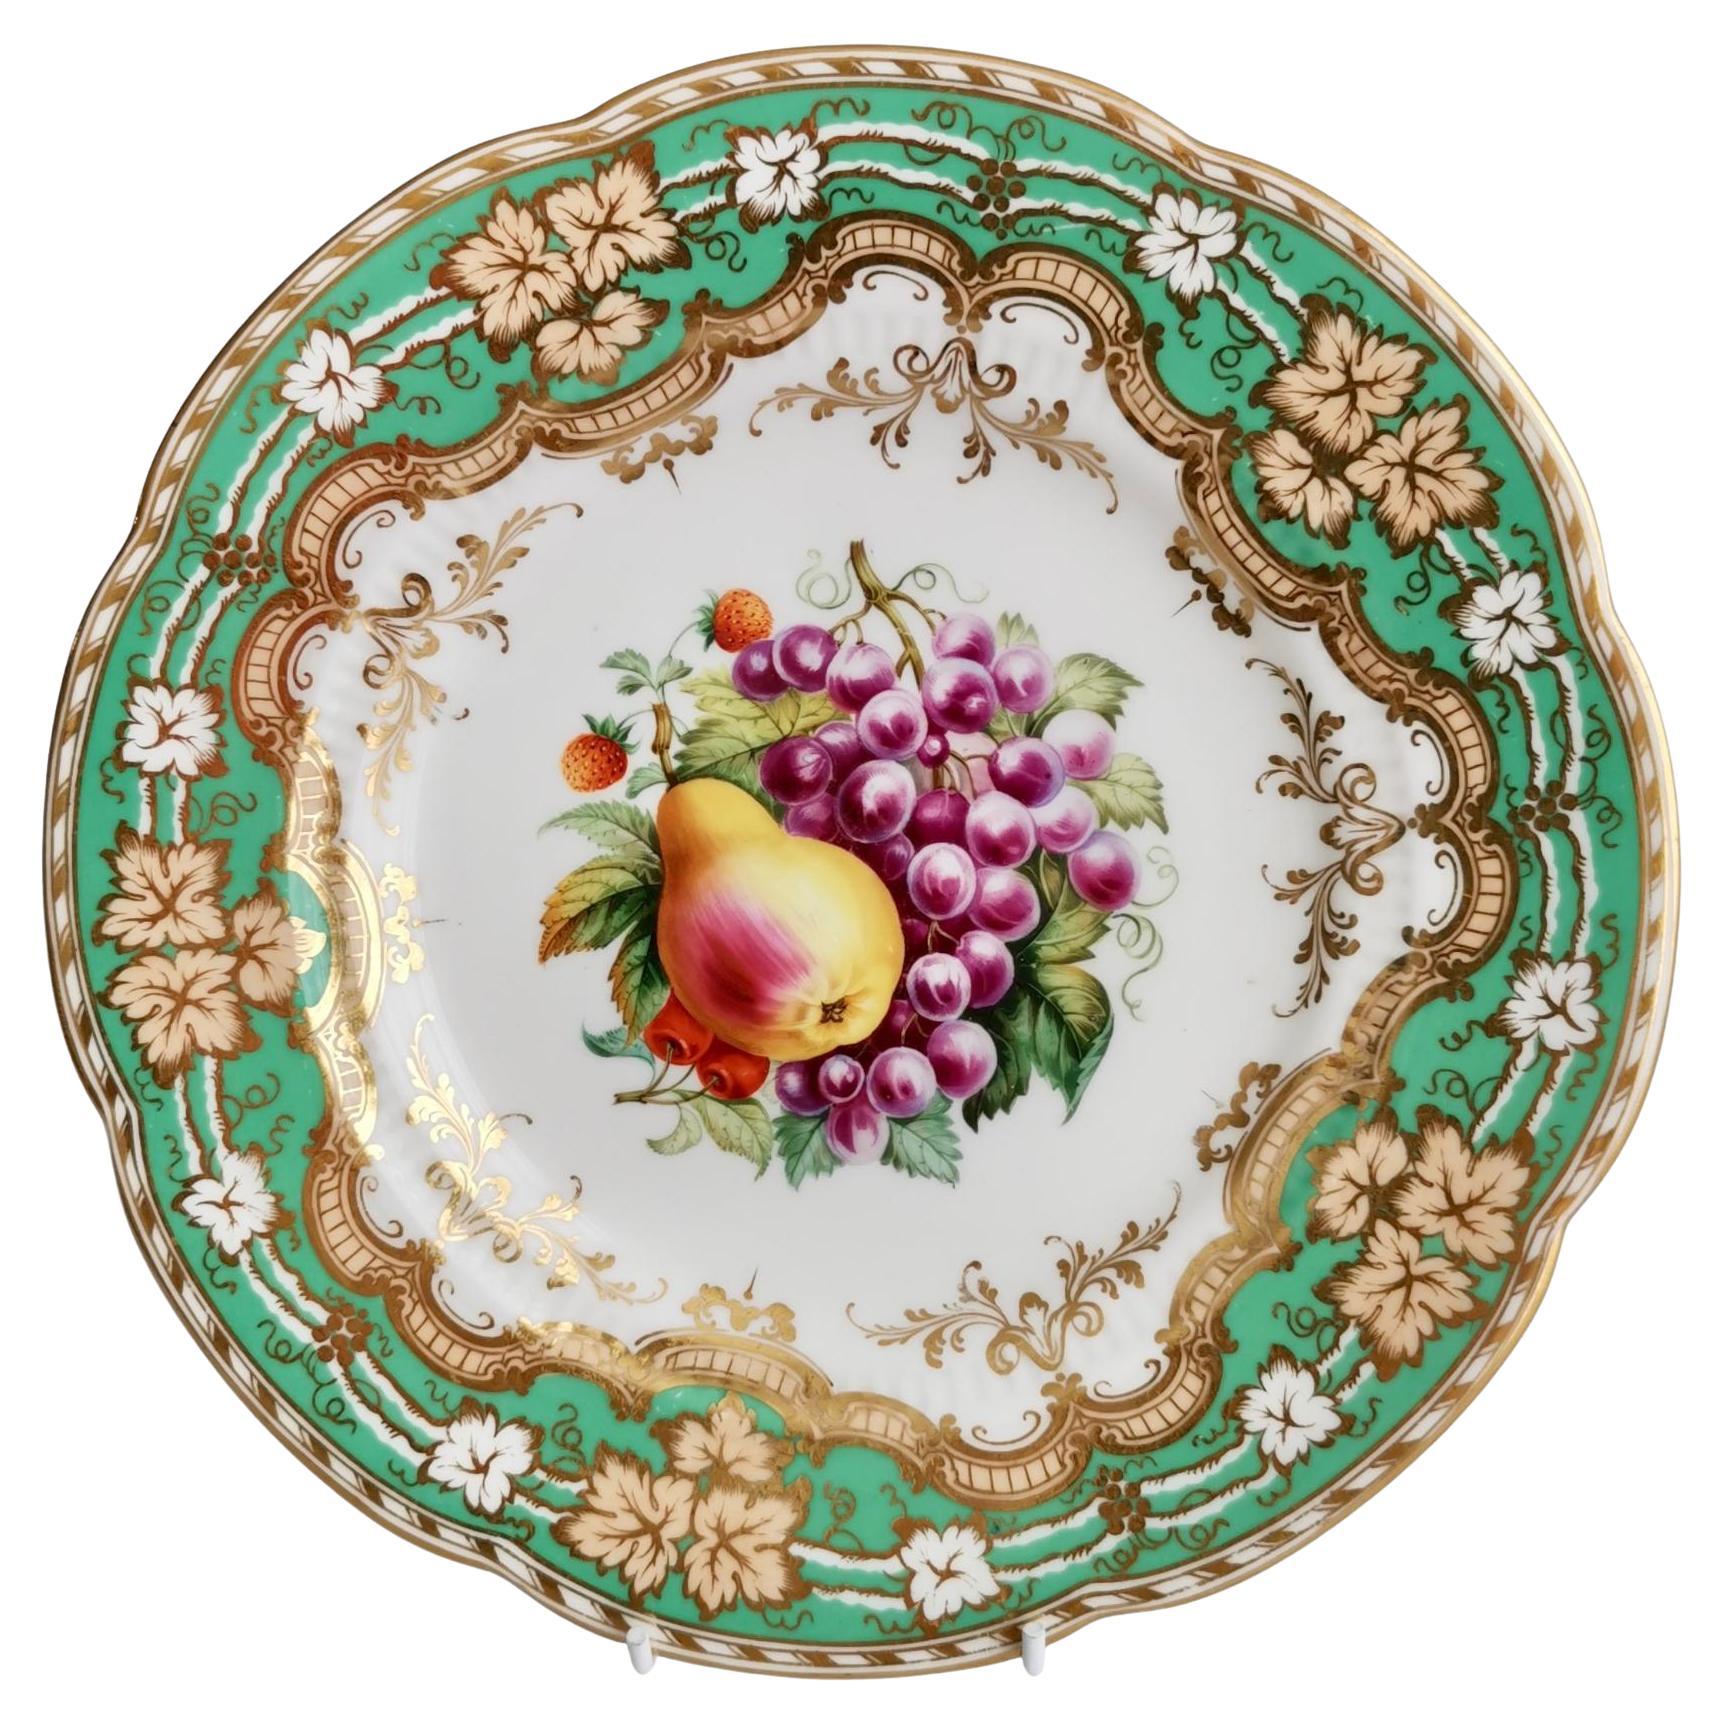 Ridgway Plate, Emerald Green, Gilt and Sublime Hand Painted Fruits, ca 1853